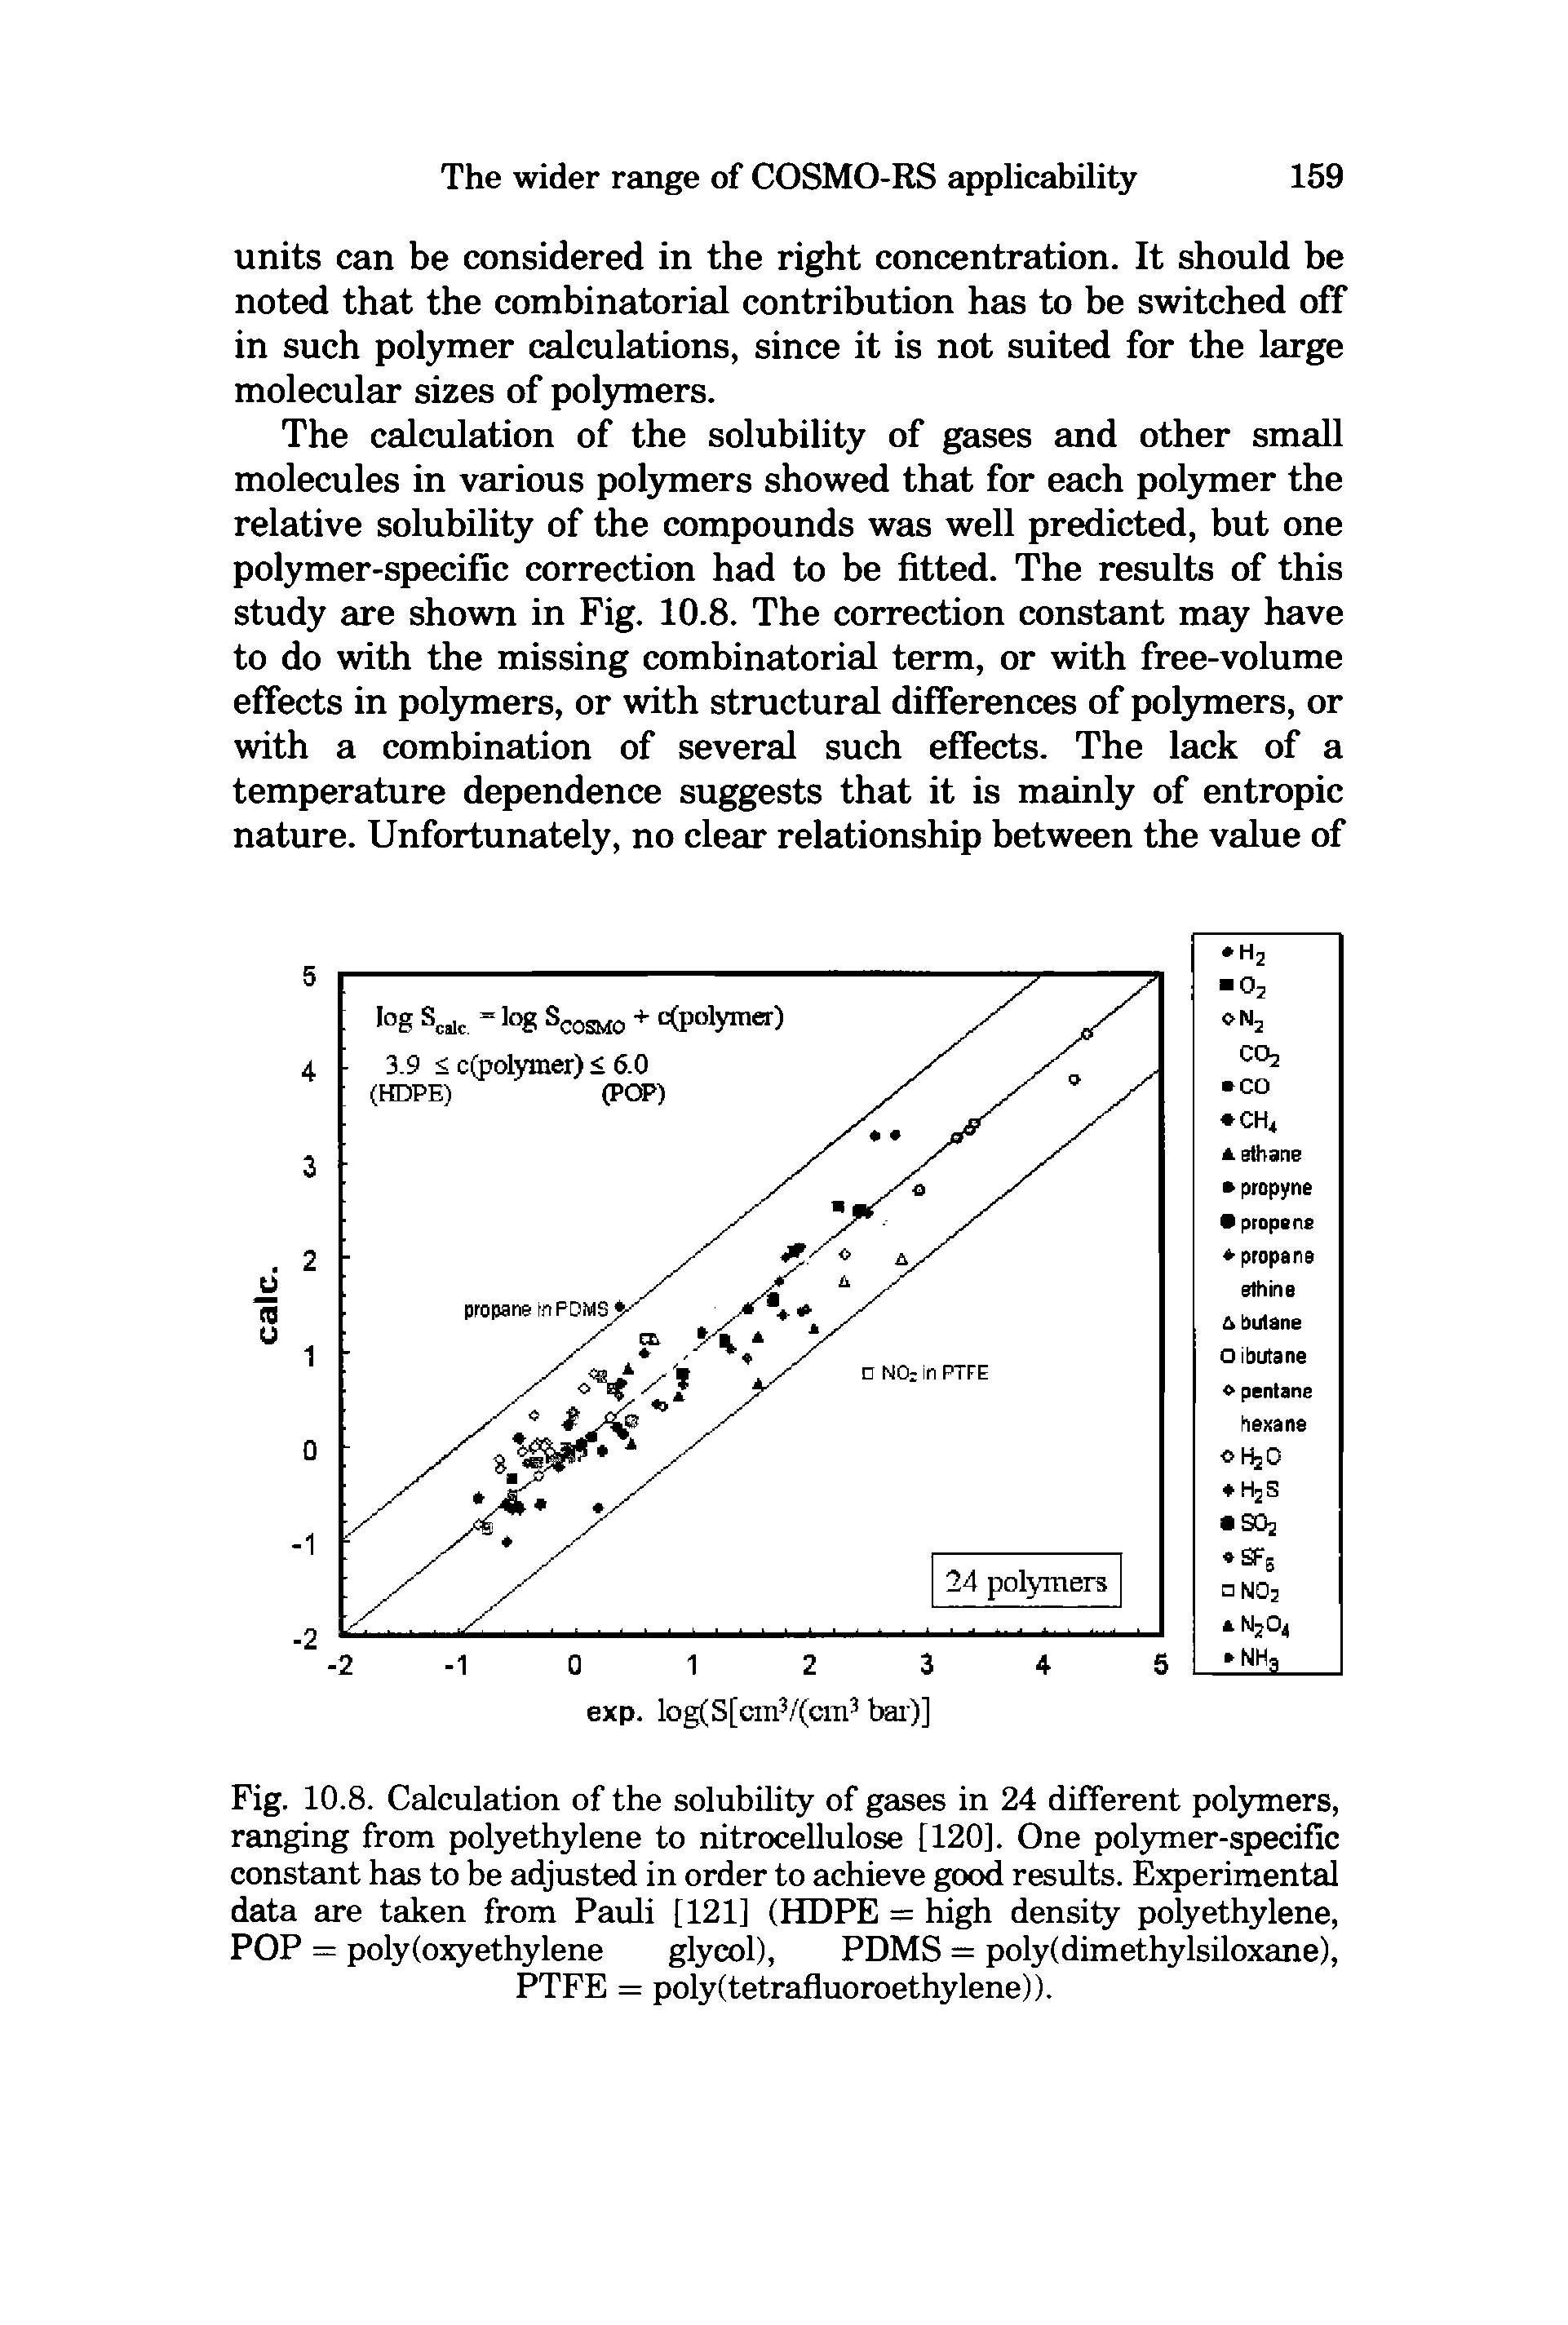 Fig. 10.8. Calculation of the solubility of gases in 24 different polymers, ranging from polyethylene to nitrocellulose [120], One polymer-specific constant has to be adjusted in order to achieve good results. Experimental data are taken from Pauli [121] (HDPE = high density polyethylene, POP = polyfoxyethylene glycol), PDMS = poly(dimethylsiloxane), PTFE = poly(tetrafluoroethylene)).